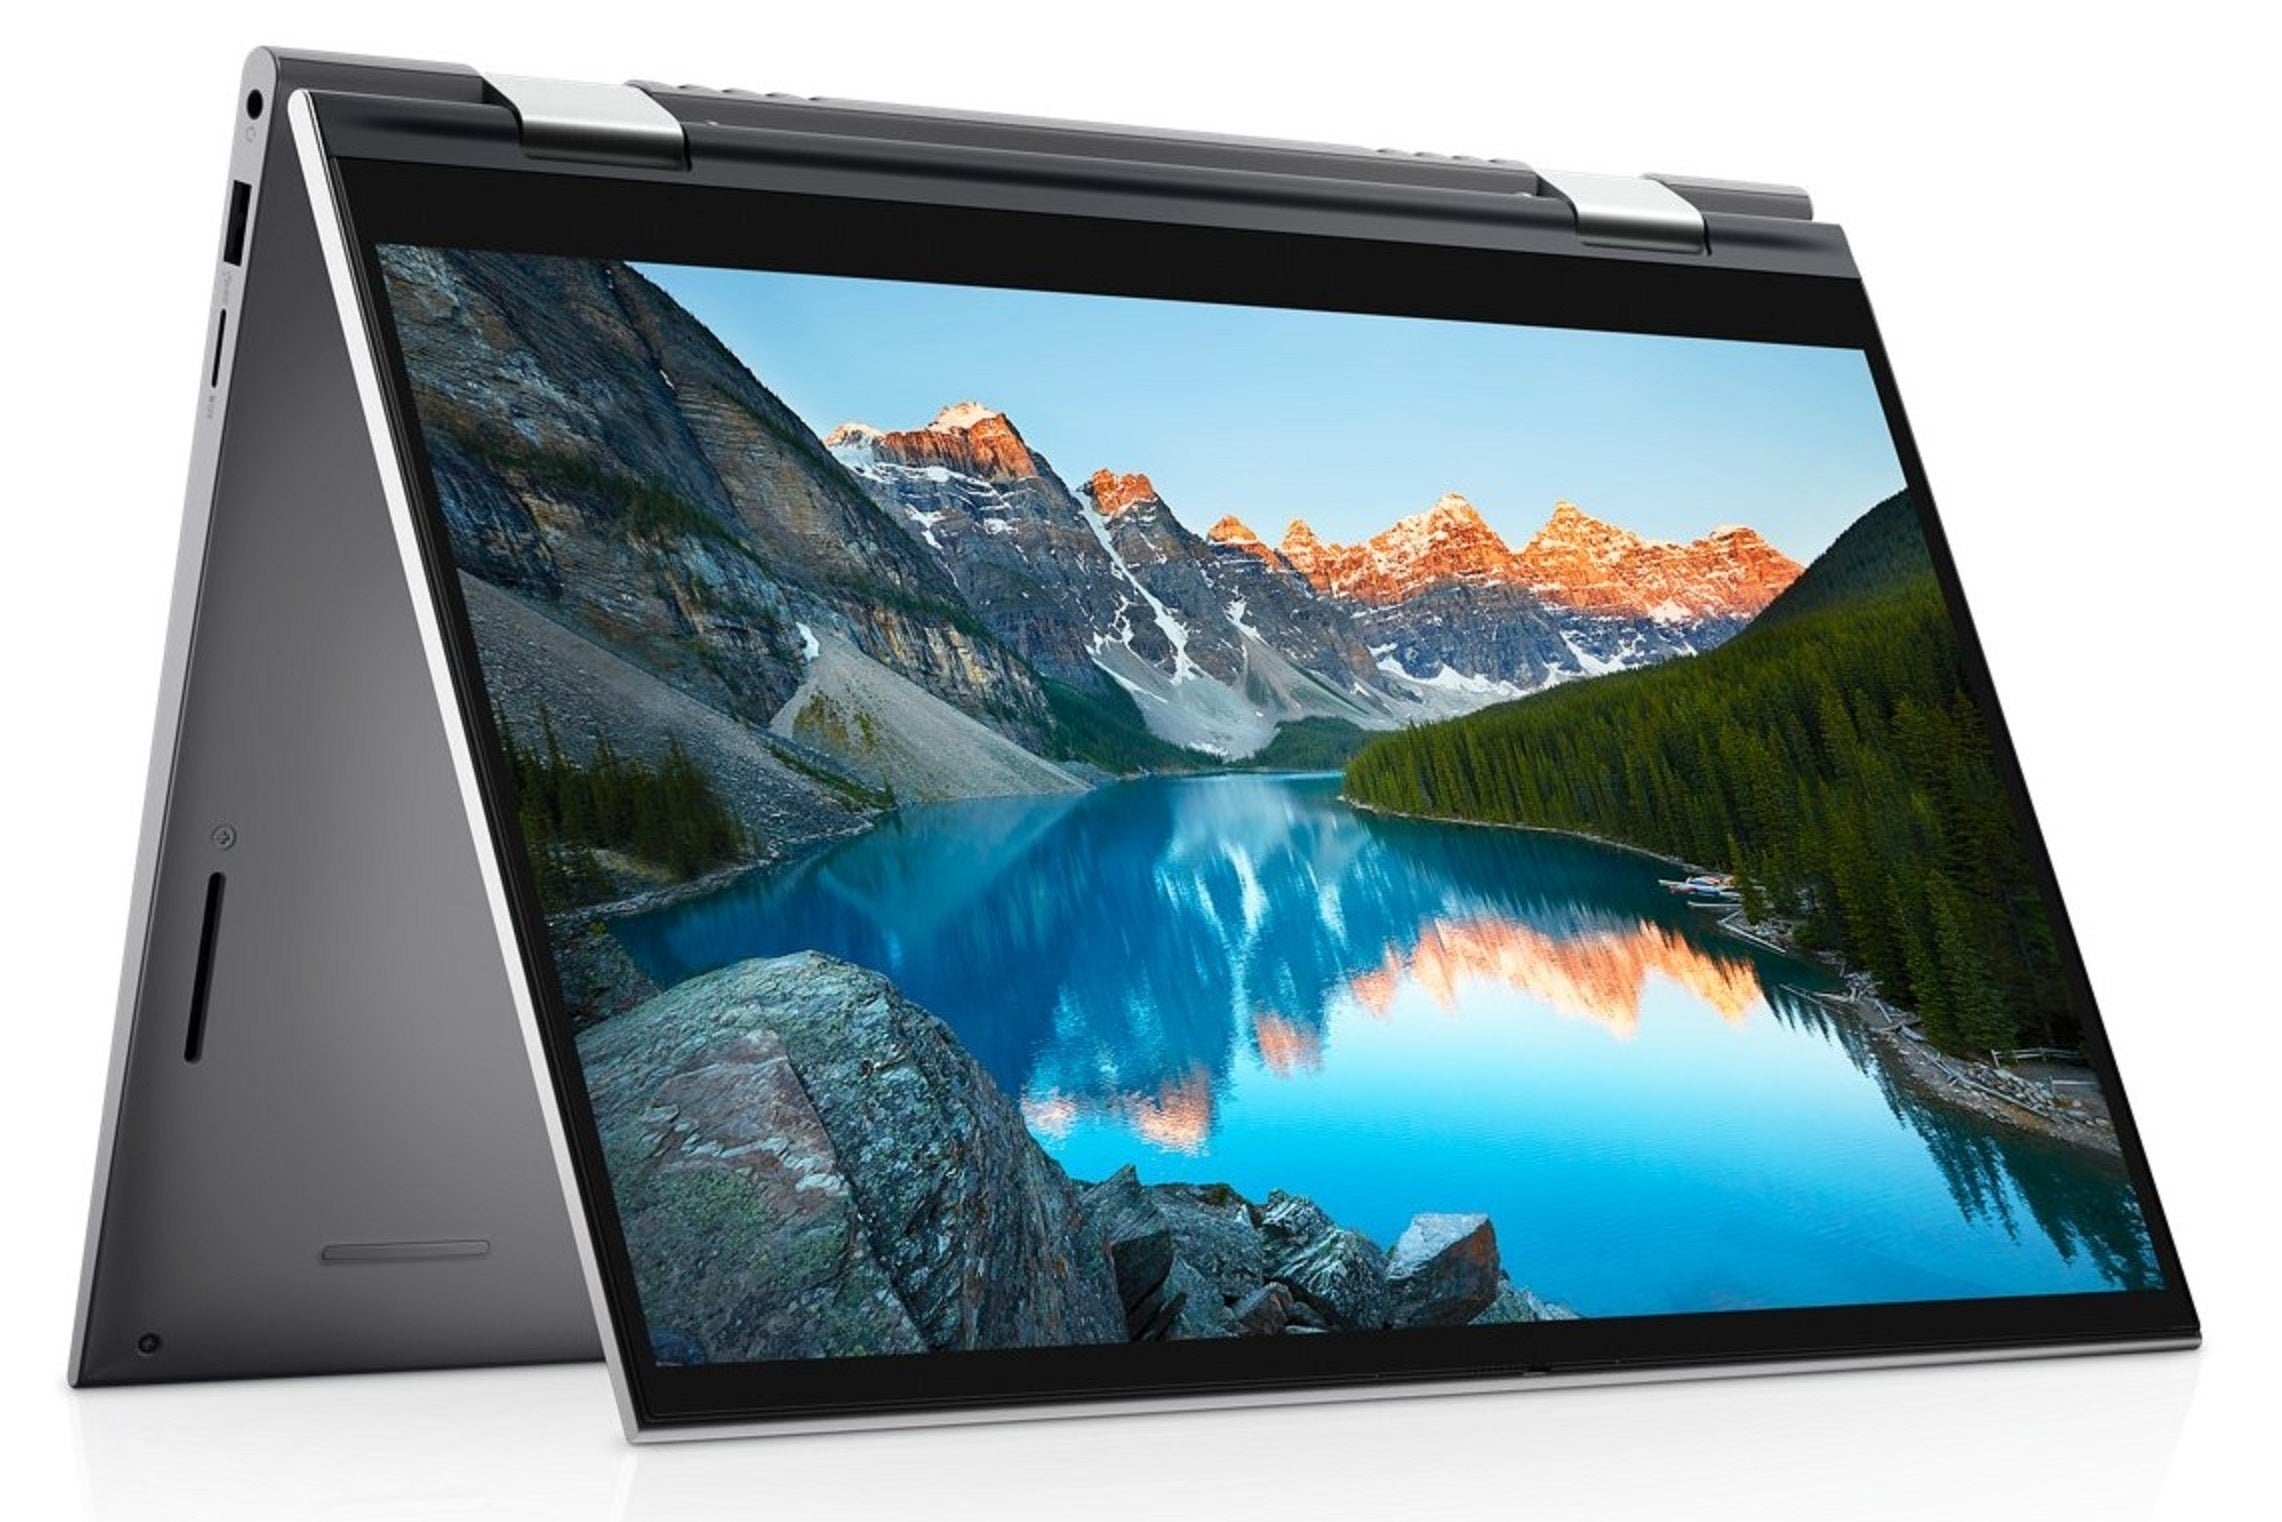 The best Dell Inspiron laptops All the new models, features, pricing